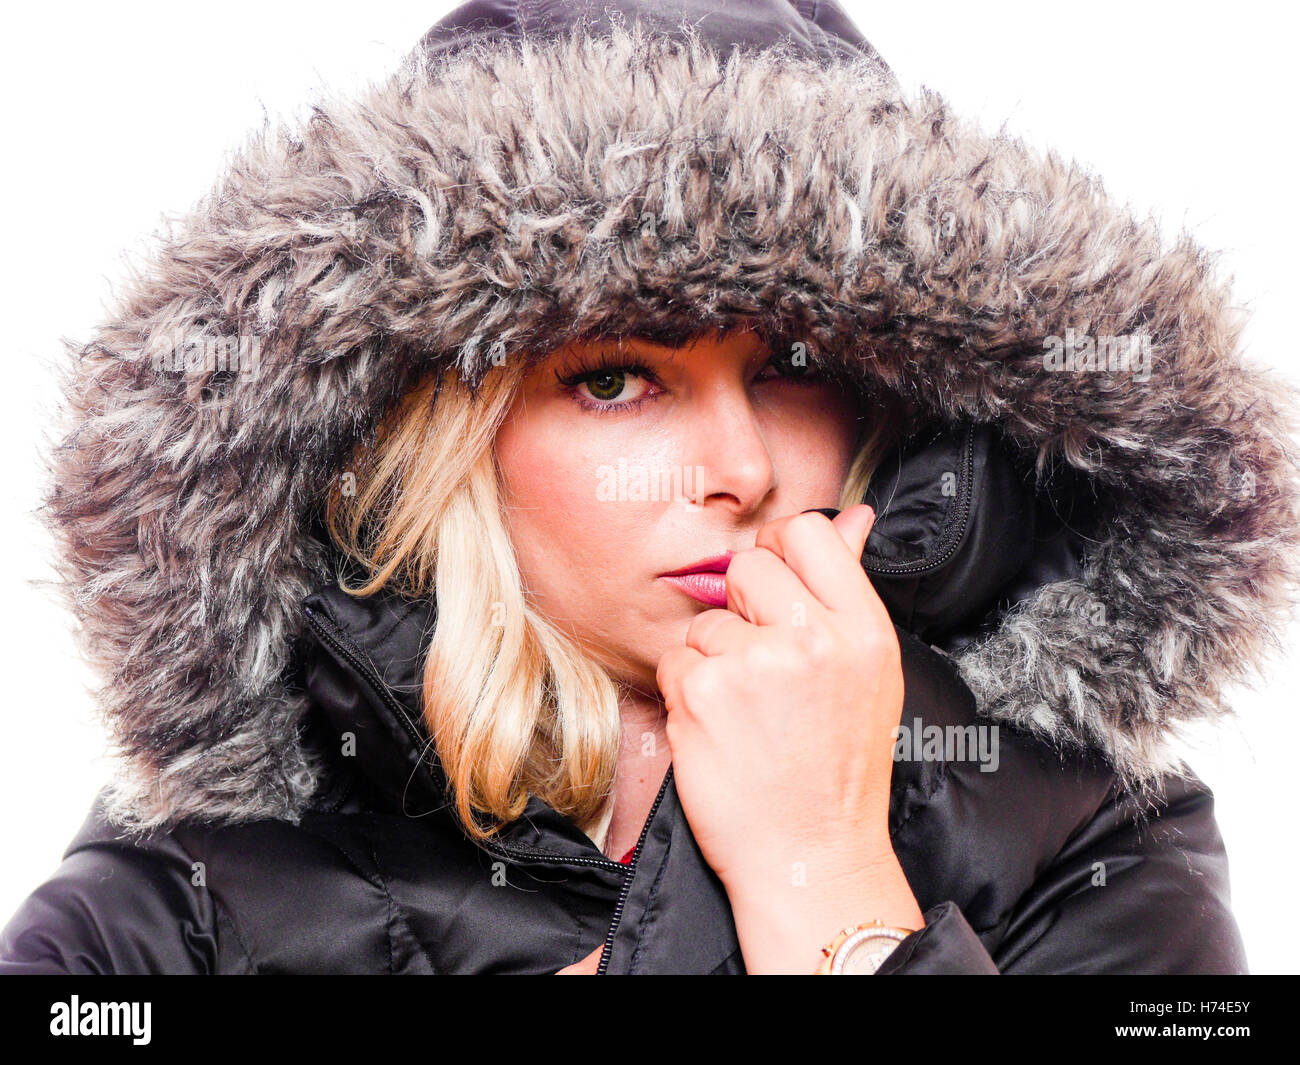 A attractive blond woman is wearing a hood around her head. Stock Photo